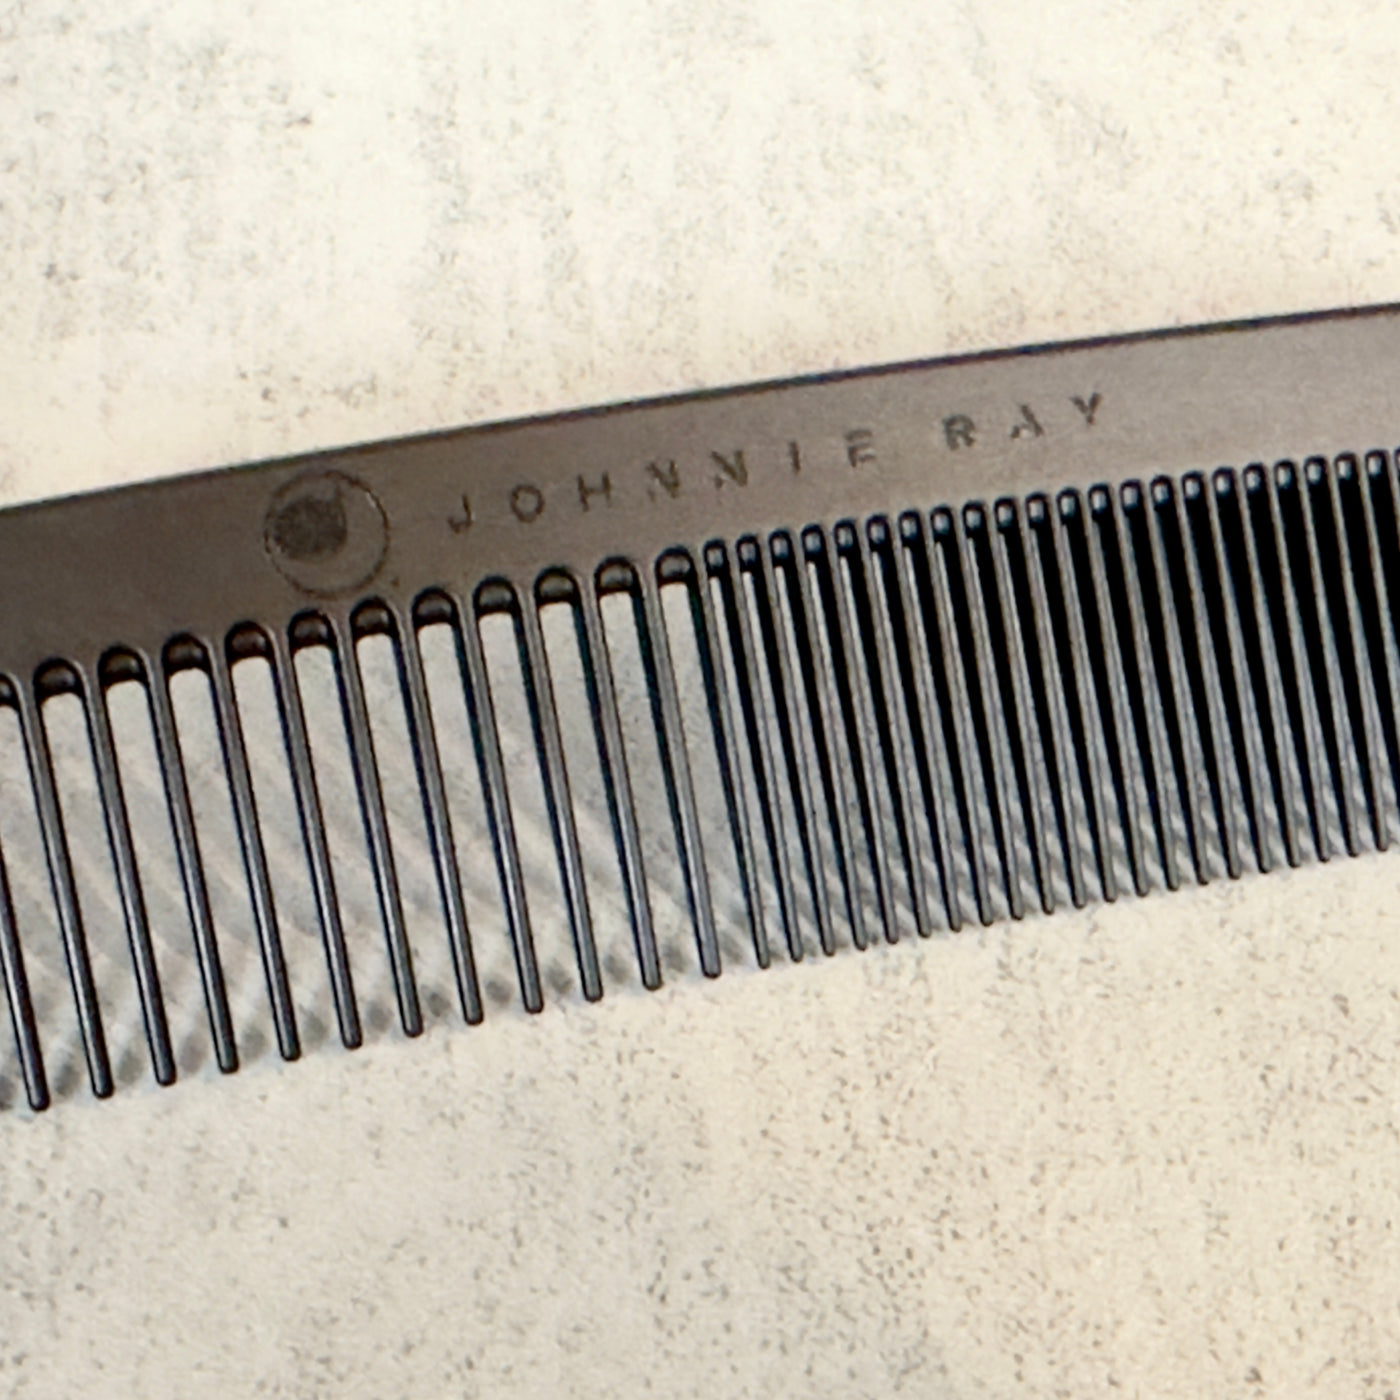 Black Chicago Comb Model 6 angled to show Johnnie Ray logo engraved across the top, laid against a concrete background.